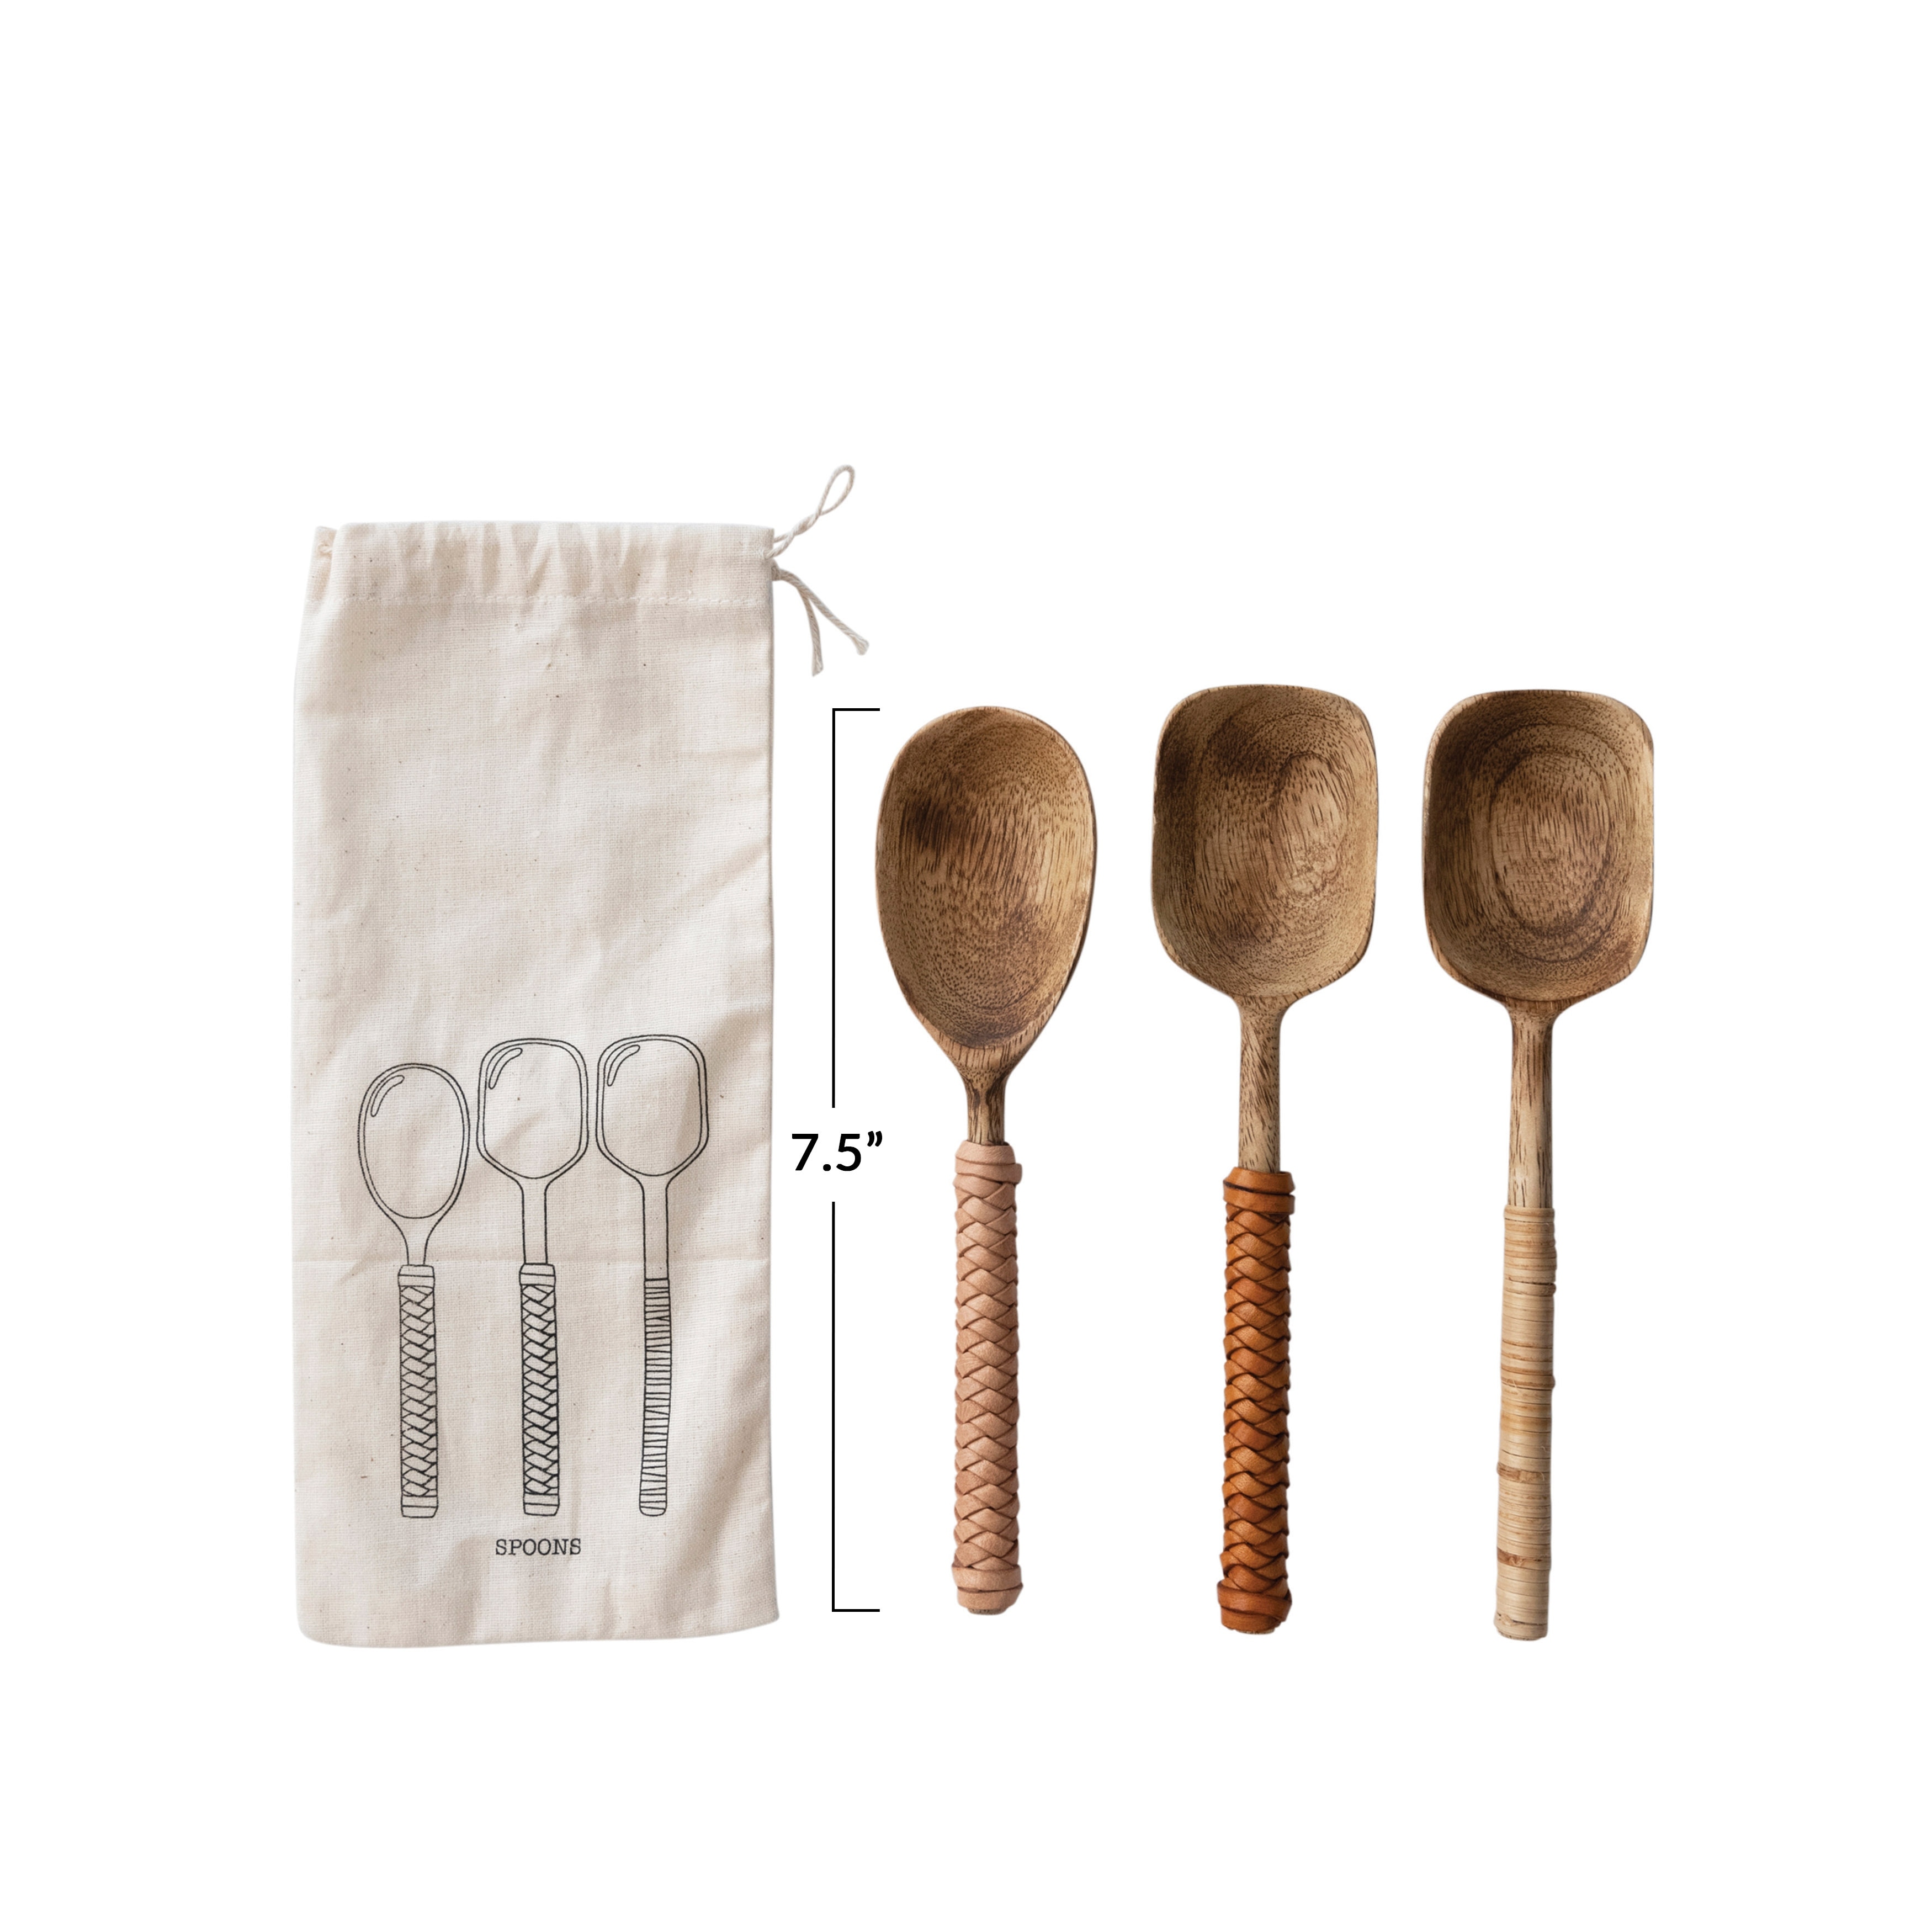 Mango Wood Spoons with Bamboo and Leather Wrapped Handles, Set of 3 in Printed Drawstring Bag